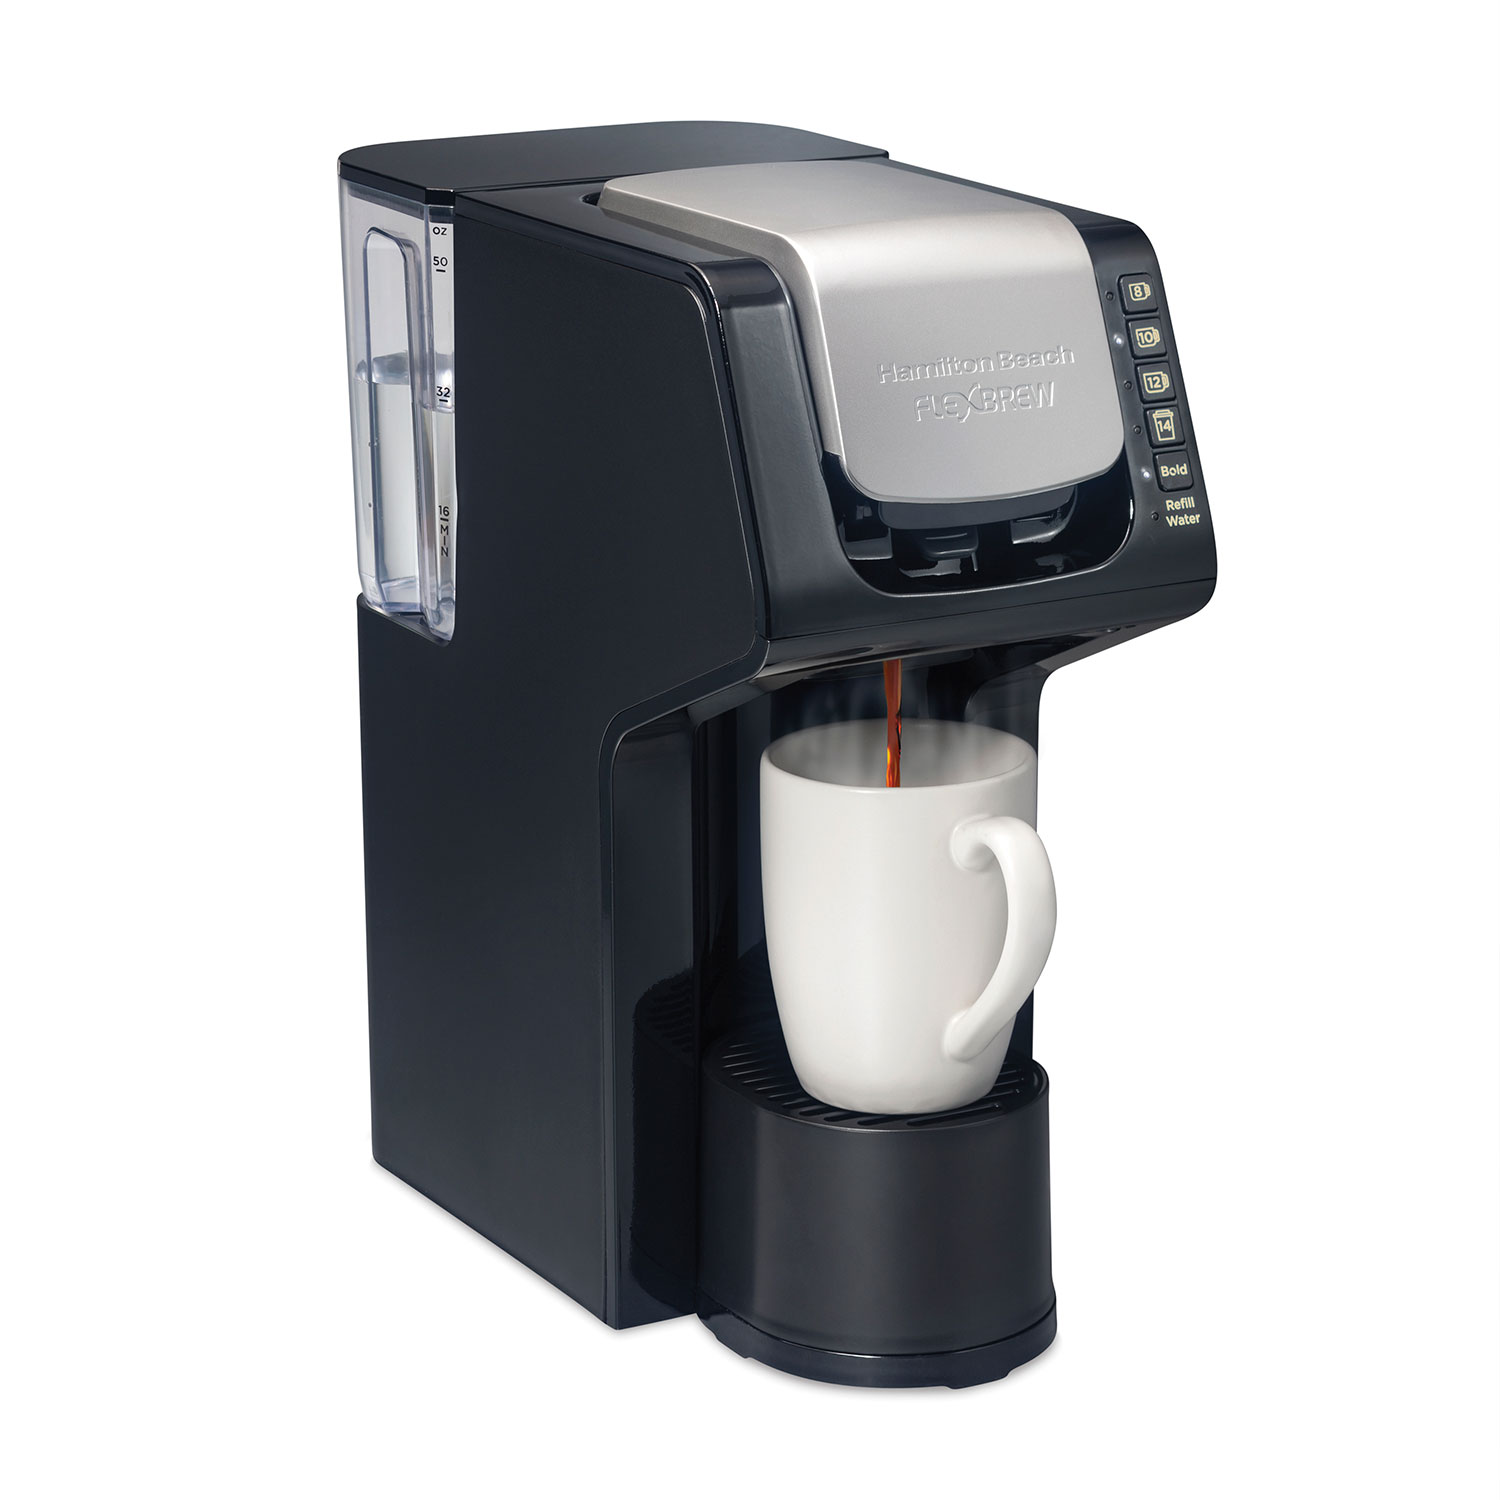 FlexBrew® Single-Serve Coffee Maker with Removable Reservoir (49901)